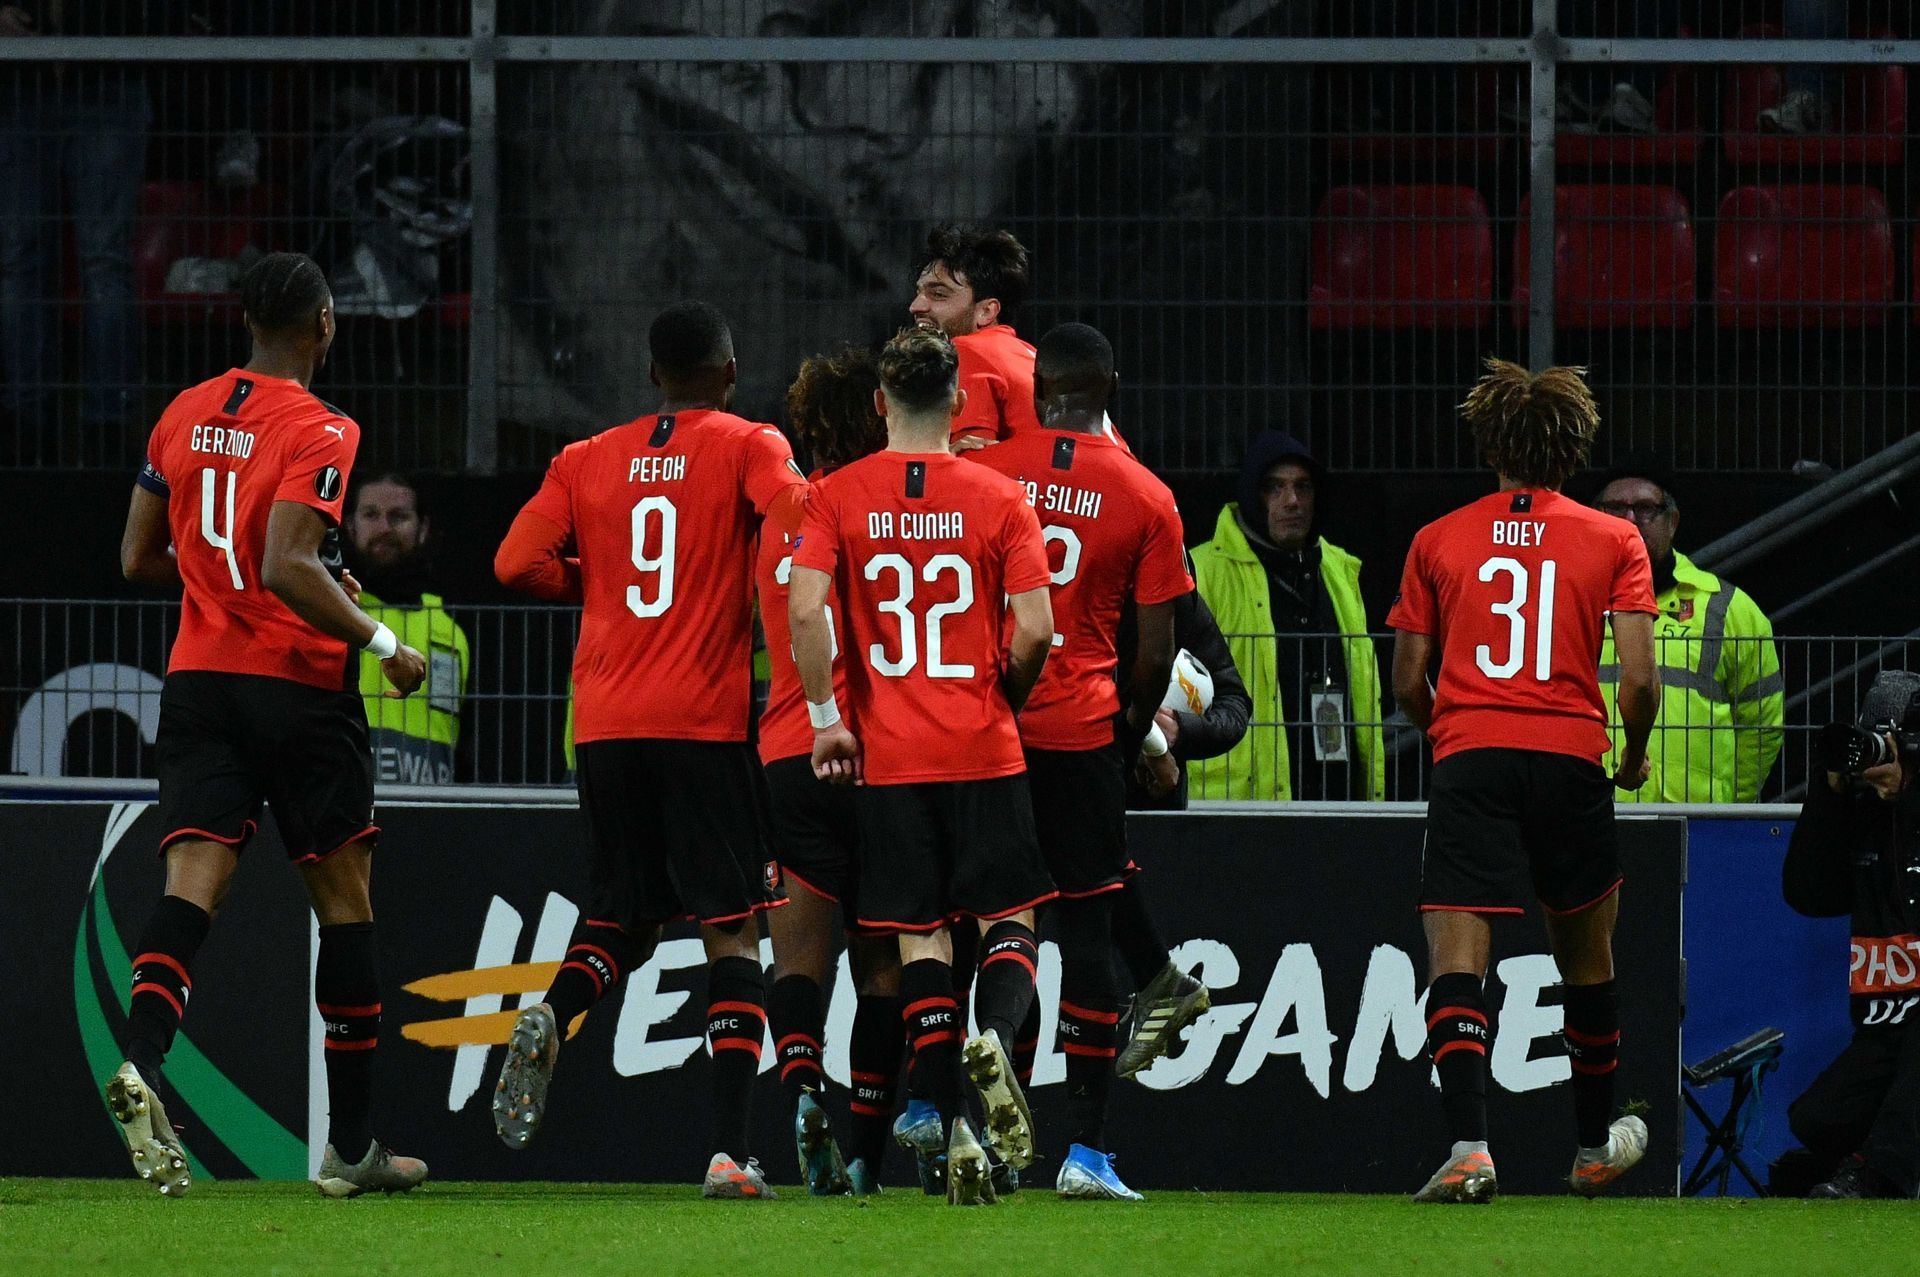 Stade Rennes host Strasbourg in their upcoming Ligue 1 fixture on Sunday